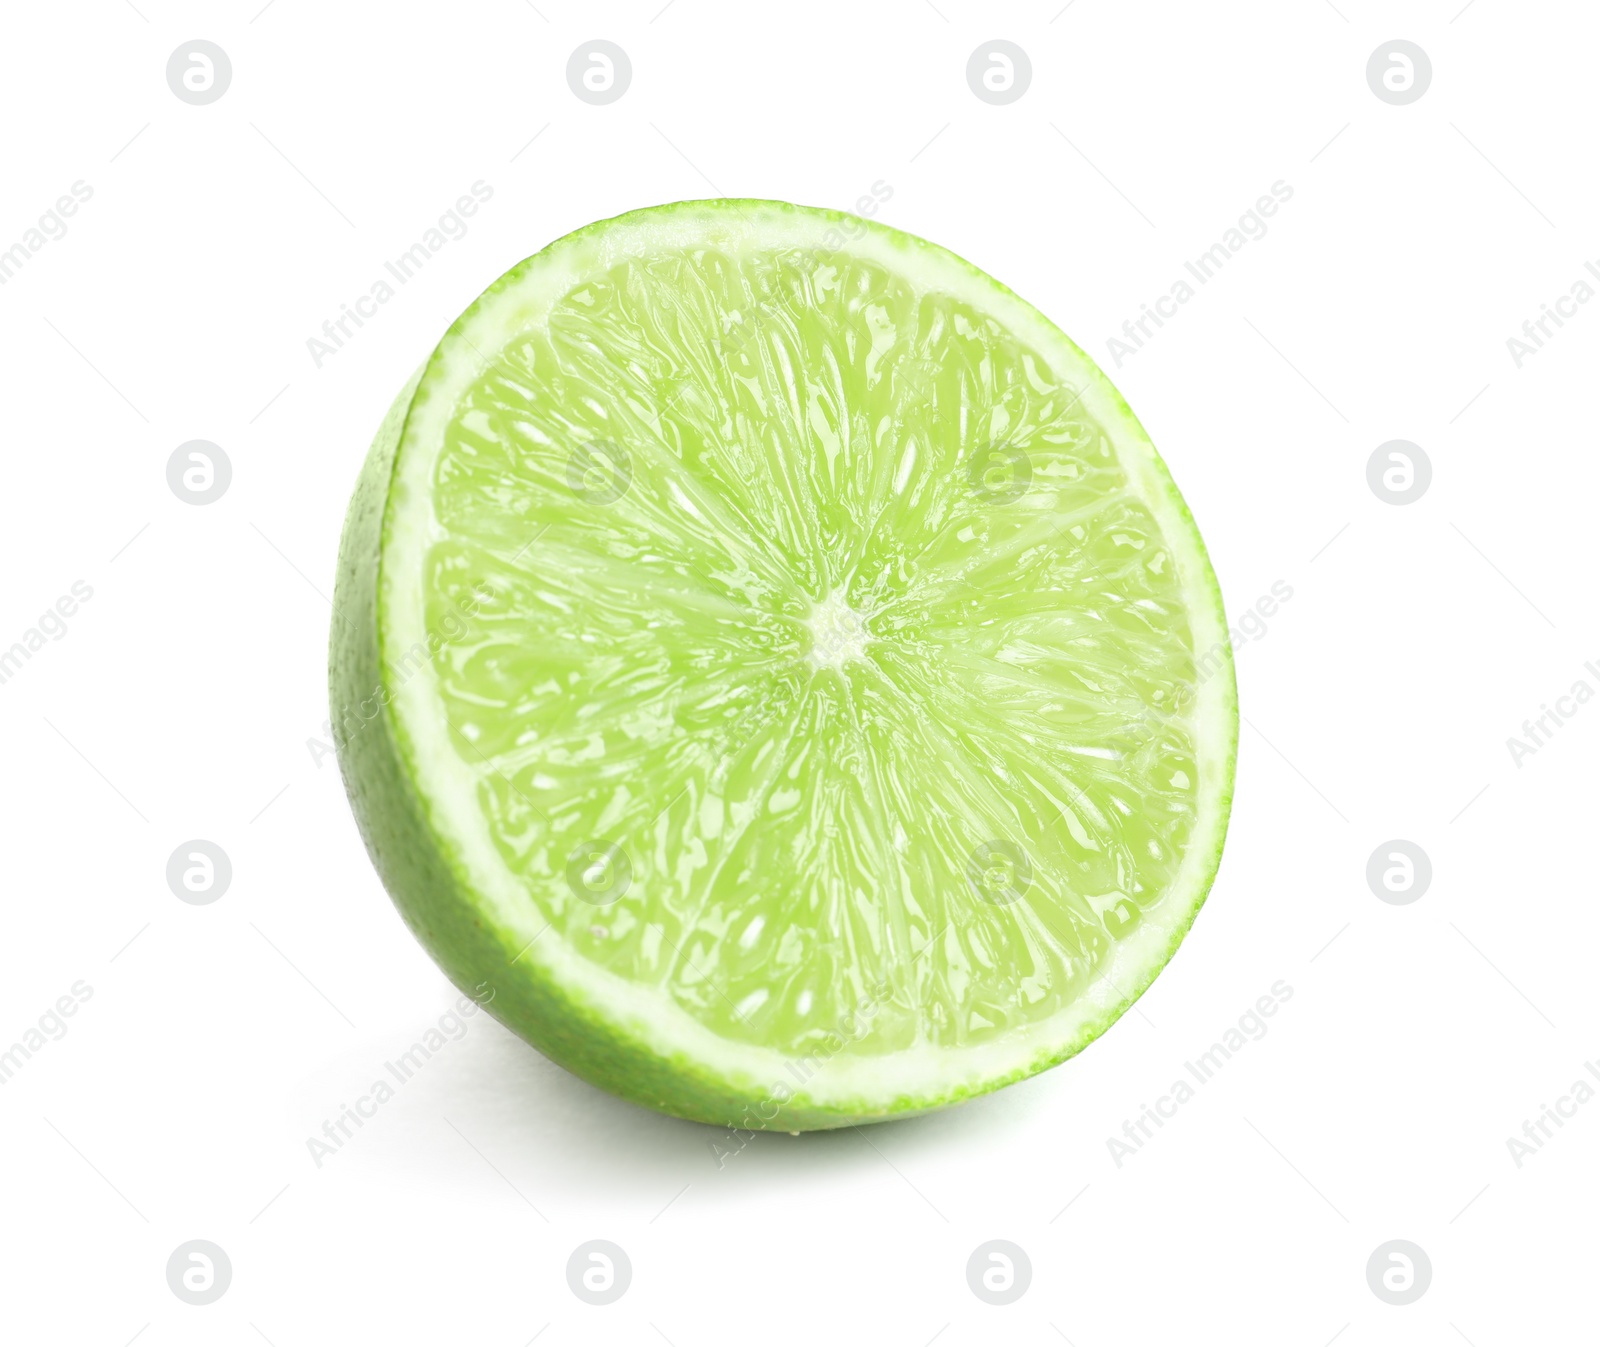 Photo of Half of fresh ripe lime on white background